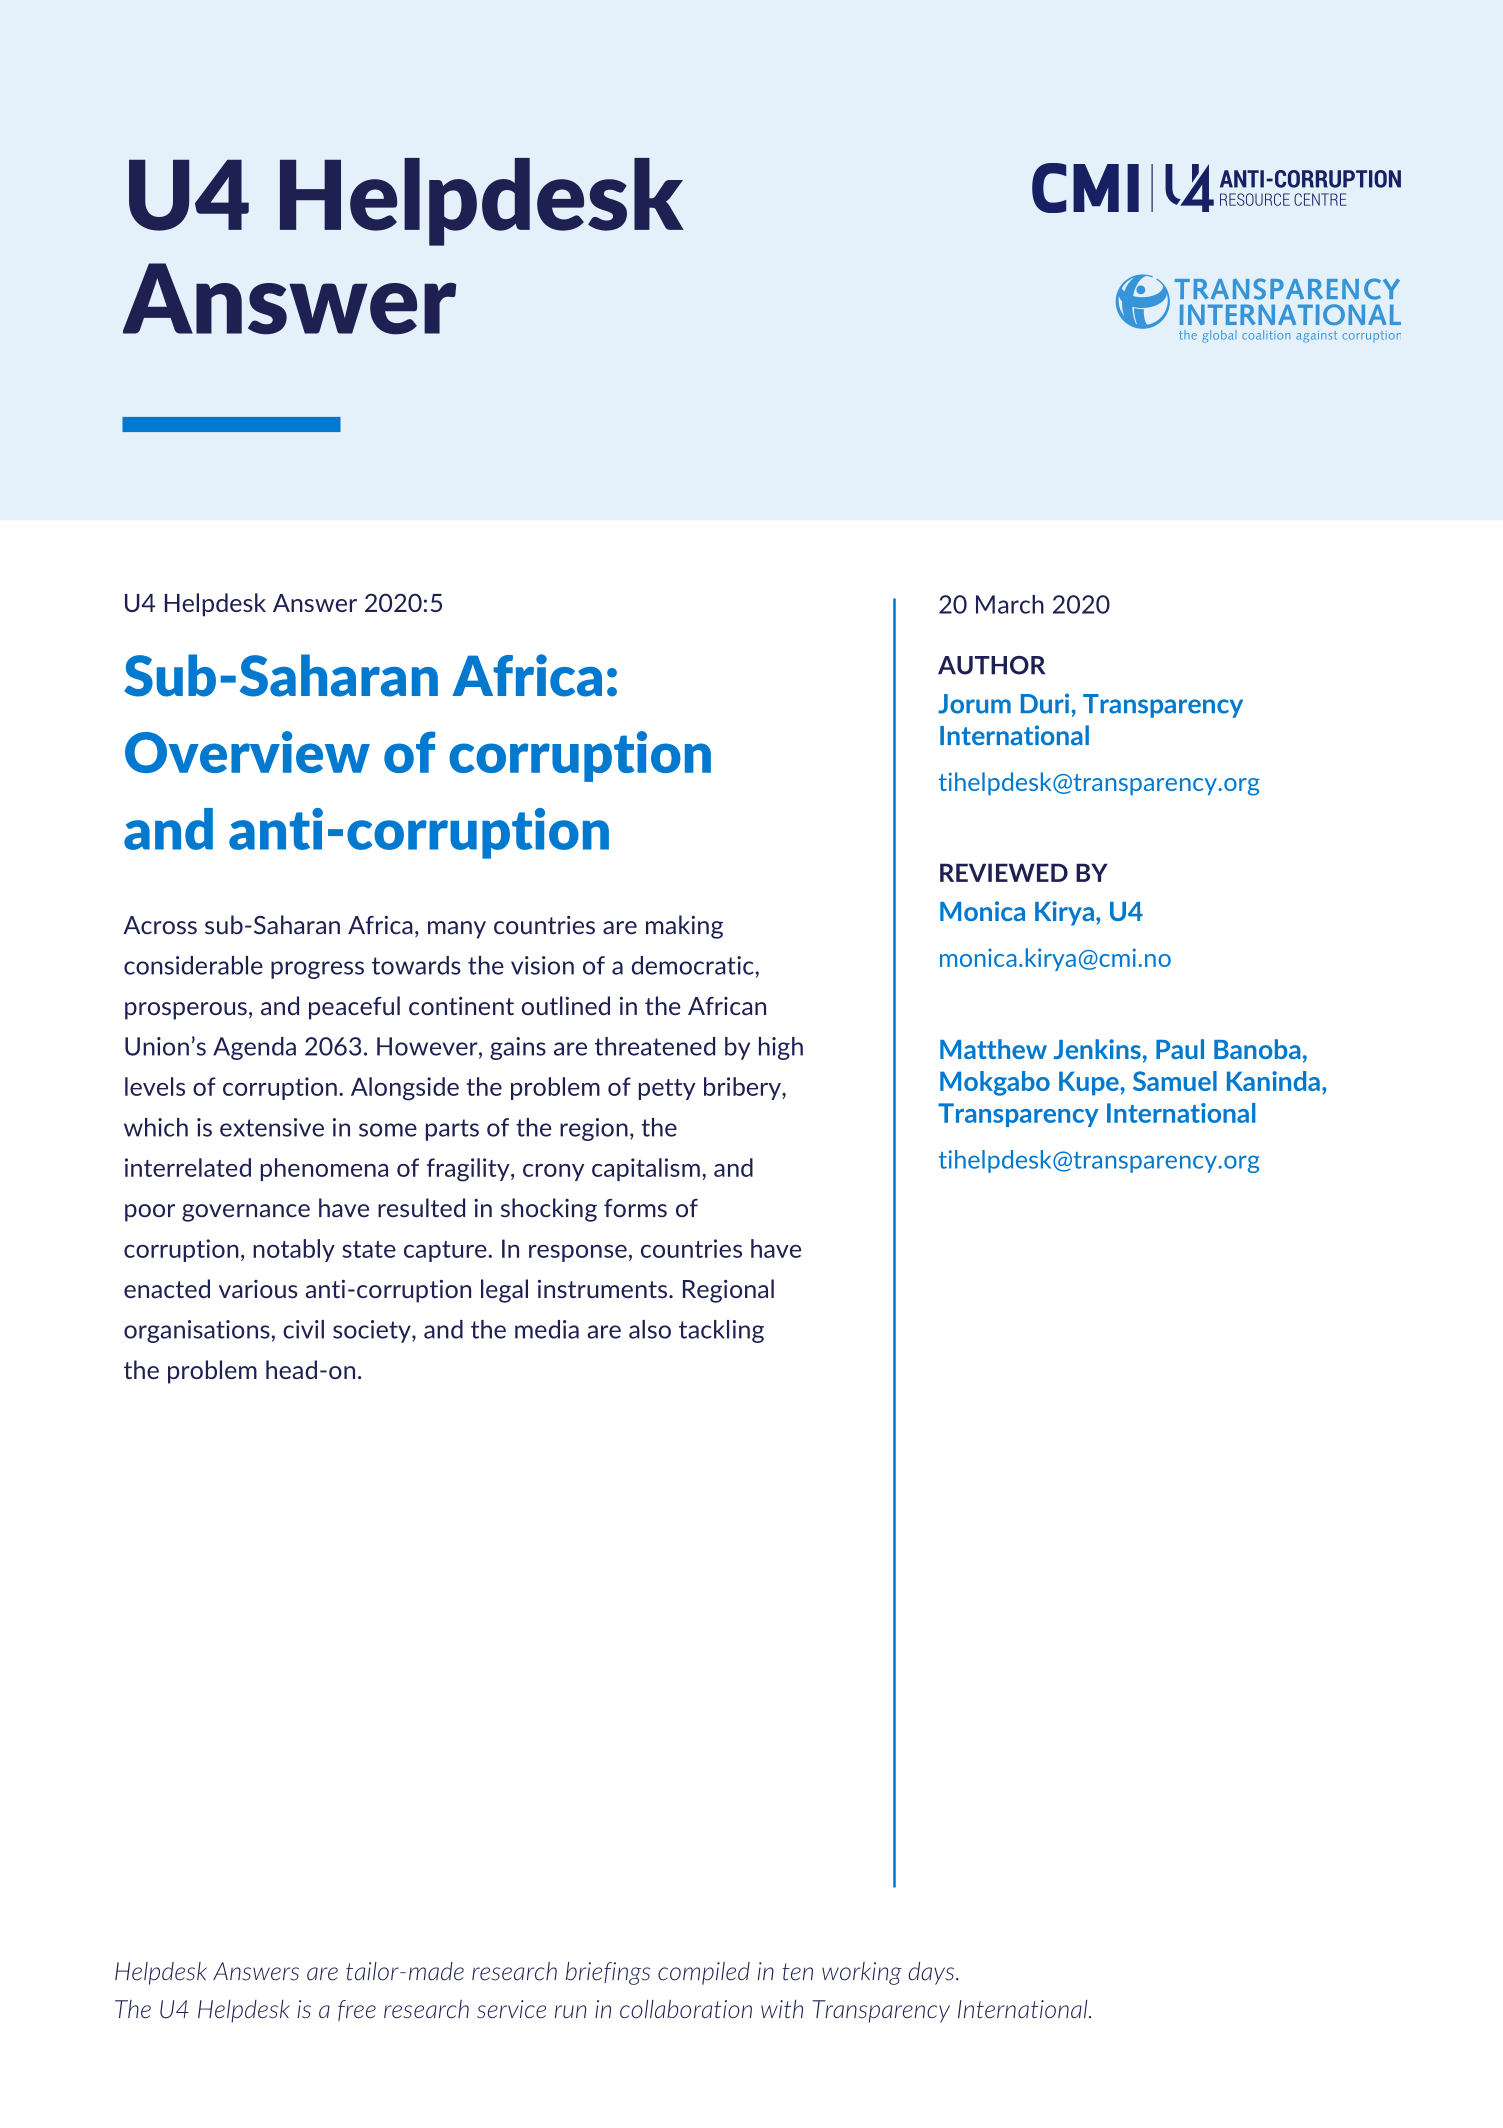 Sub-Saharan Africa: Overview of corruption and anti-corruption 